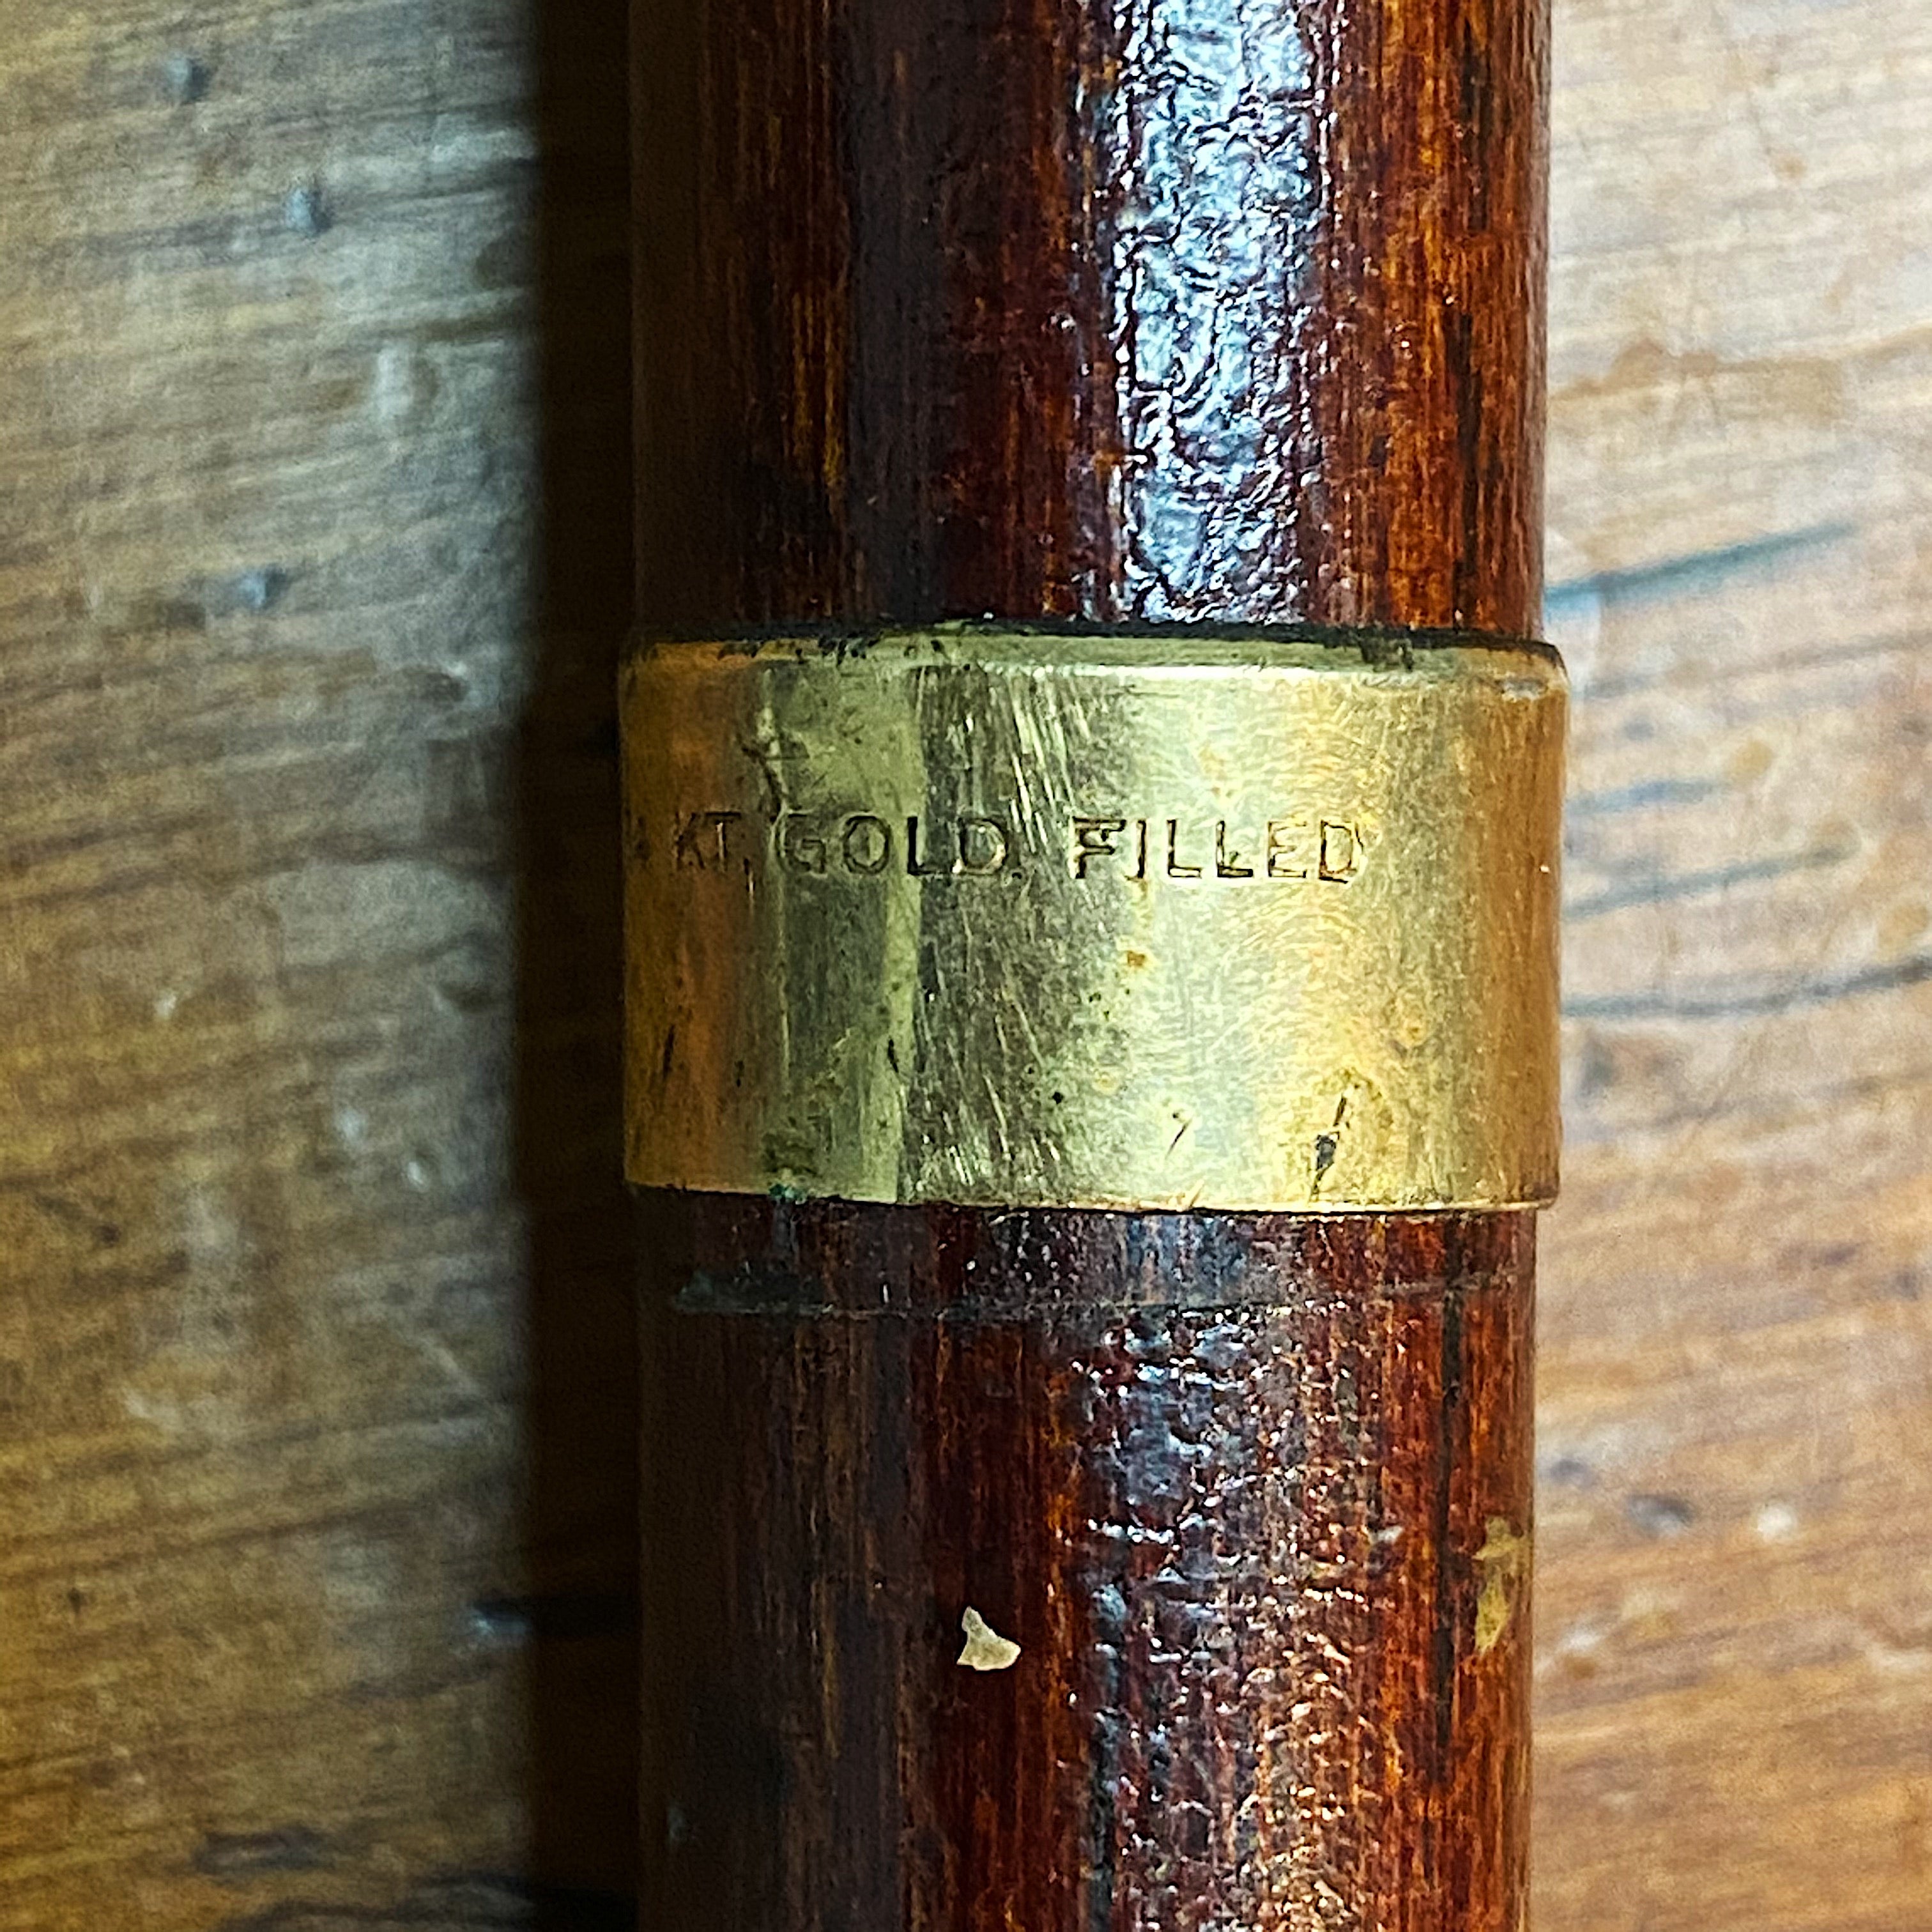 Antique Billy Club Cane with 14 Carat Gold Band | 19th Century